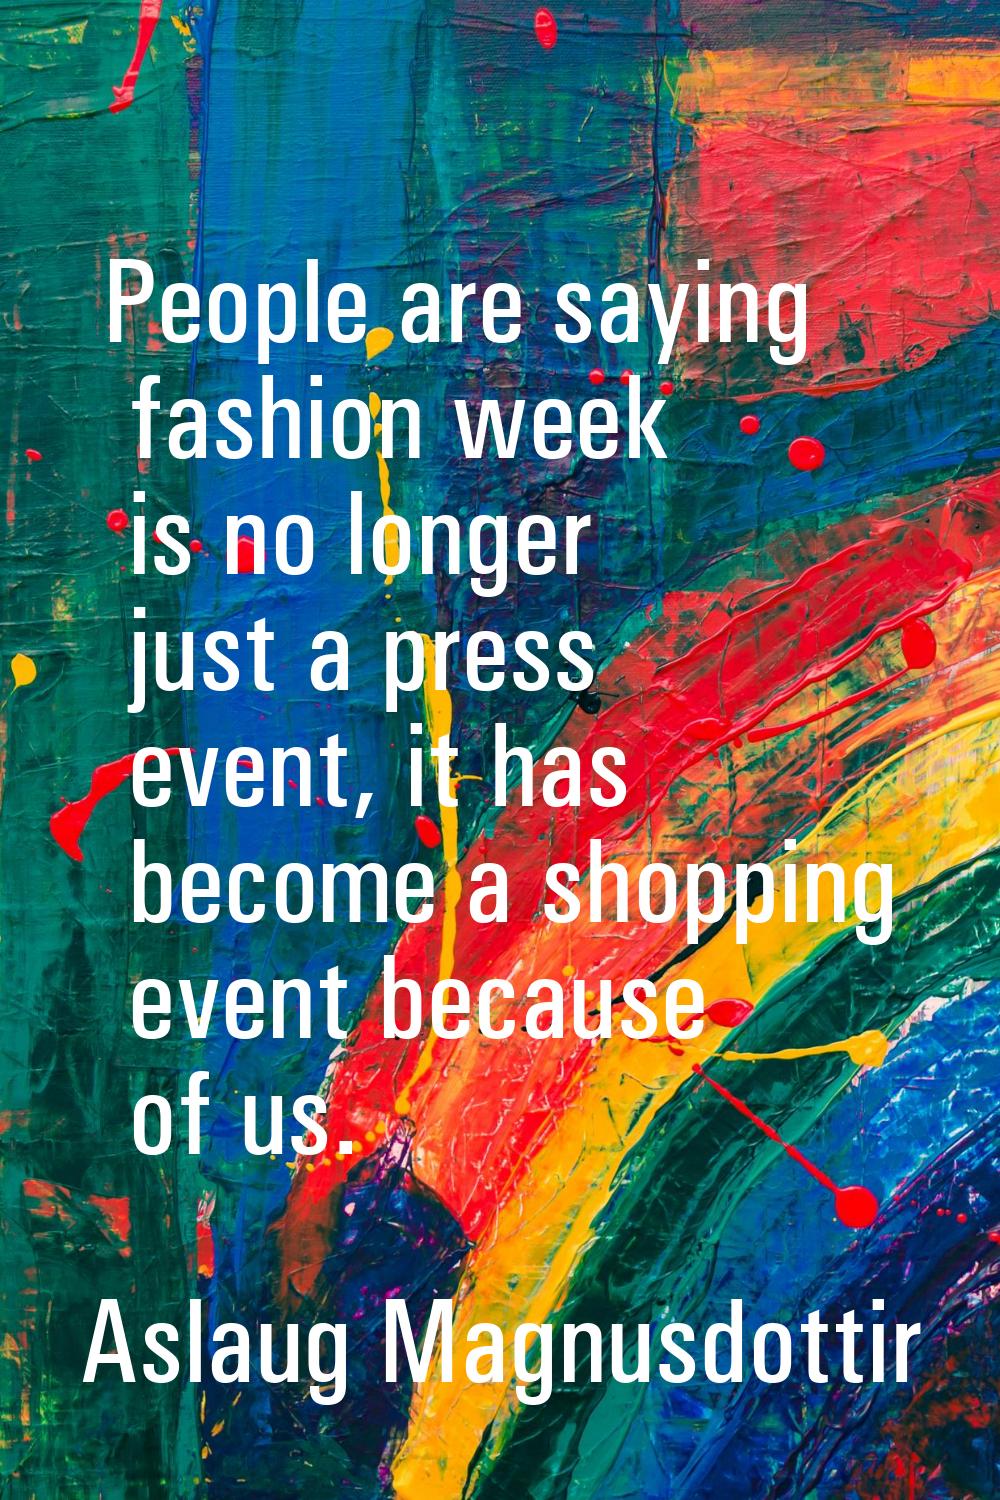 People are saying fashion week is no longer just a press event, it has become a shopping event beca